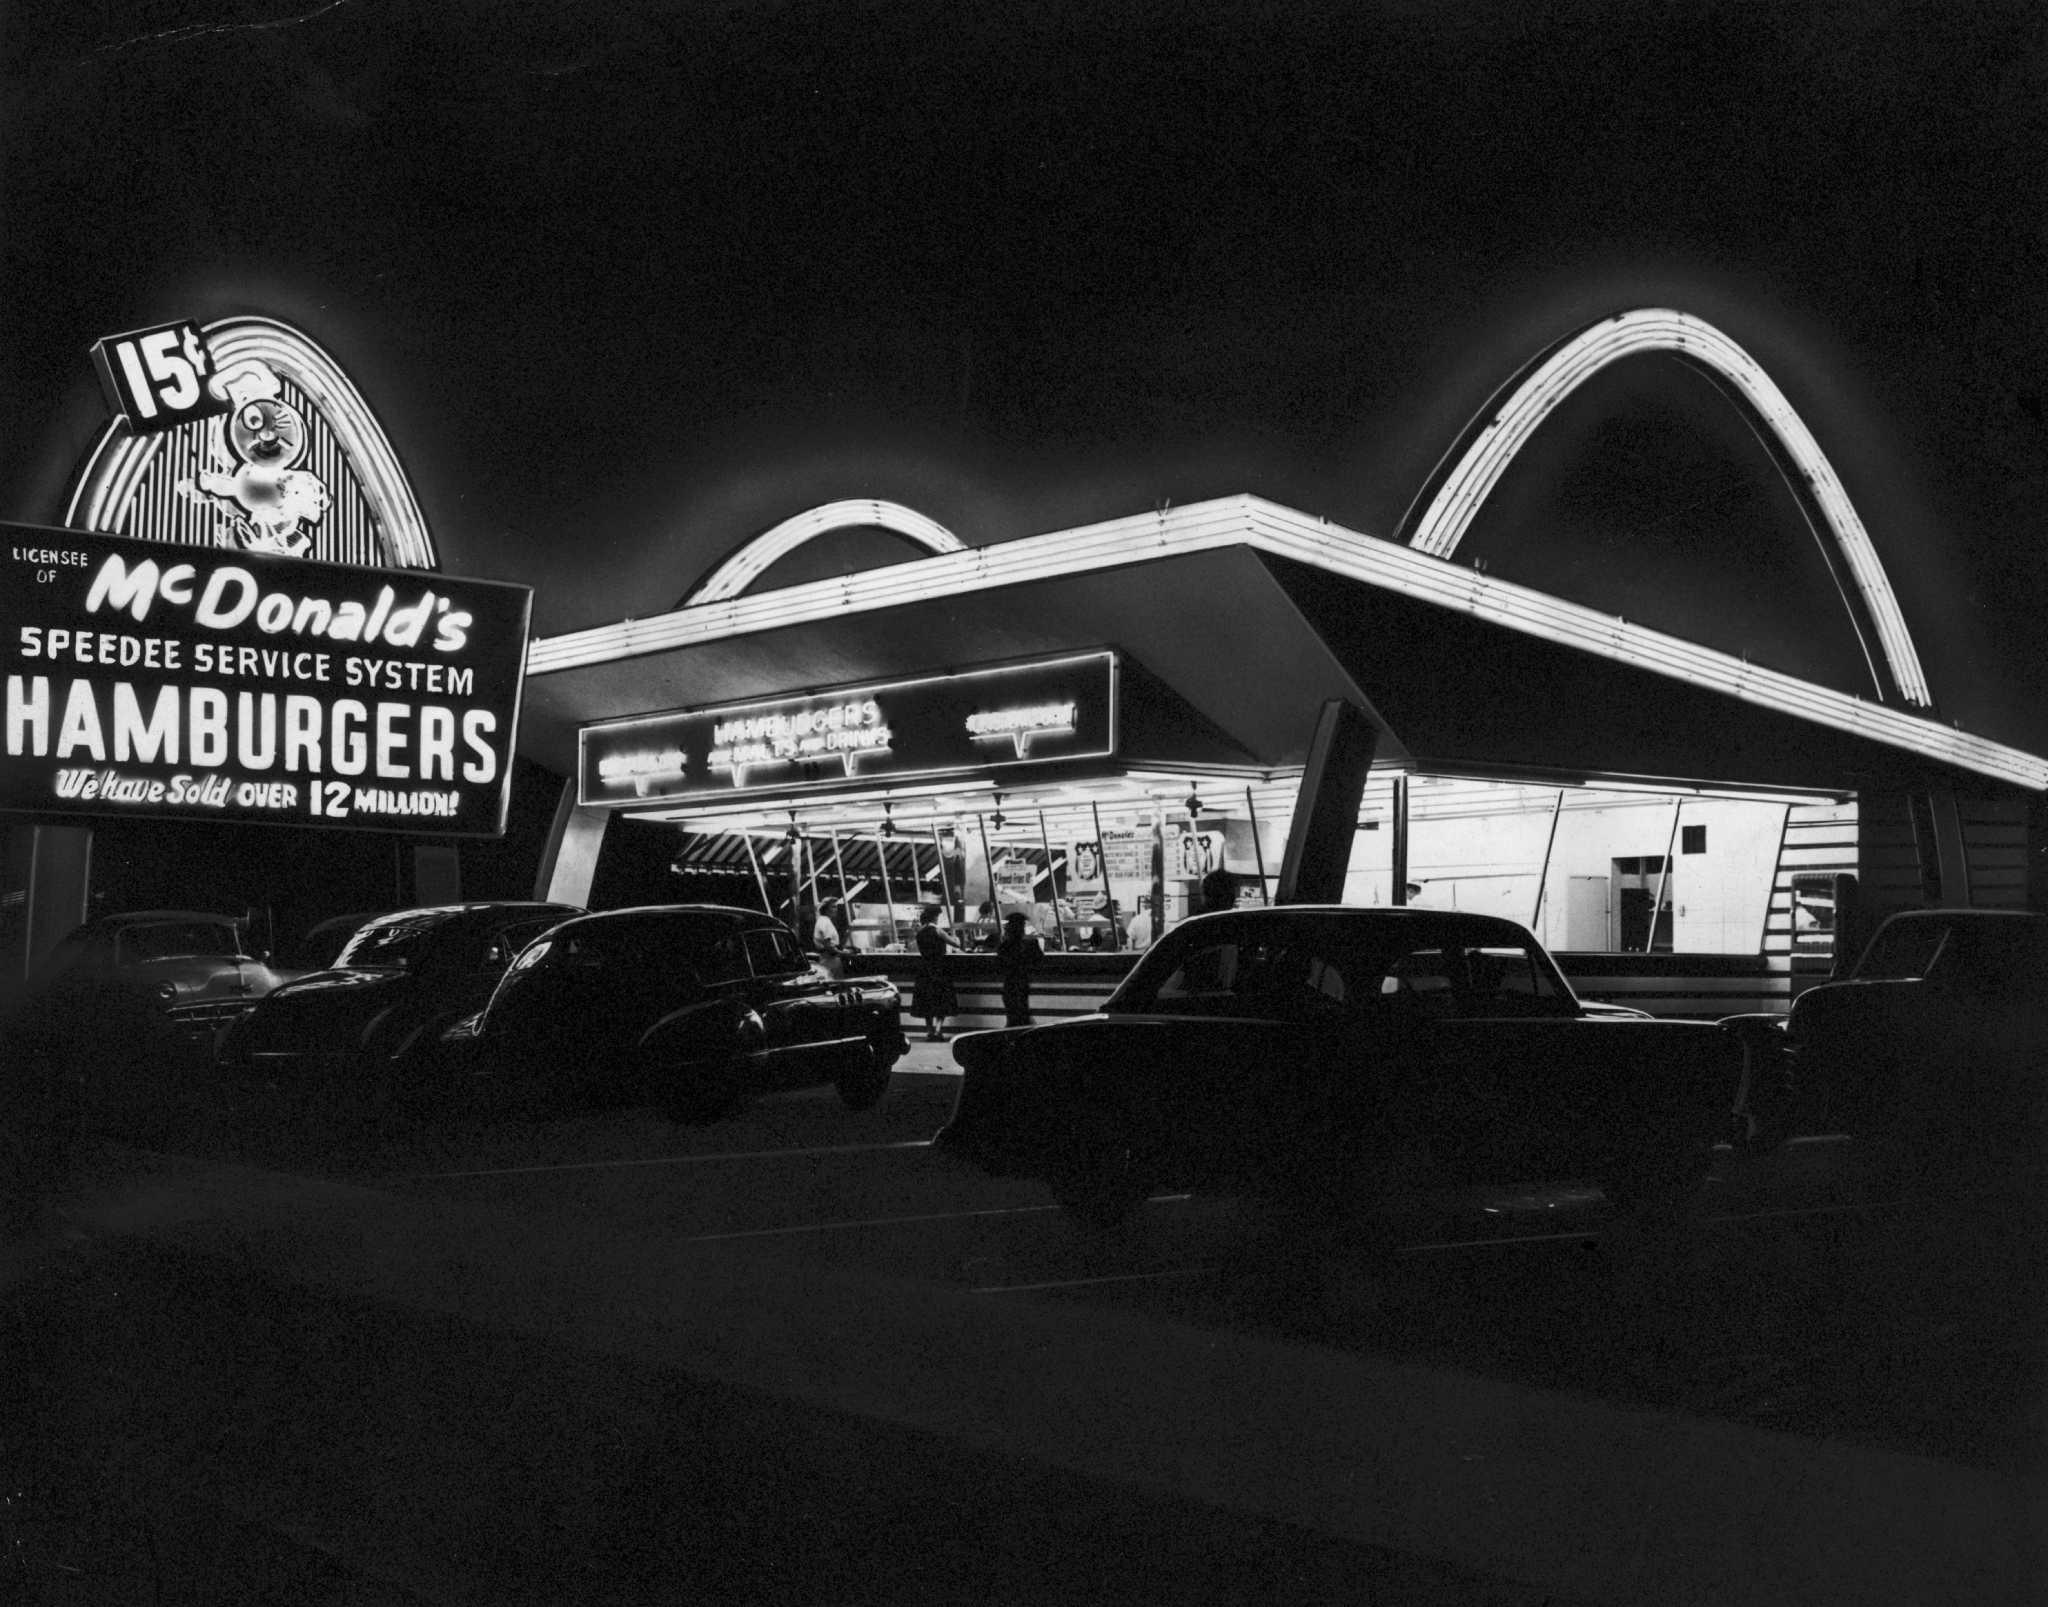 60 years since McDonald's Corporation founded